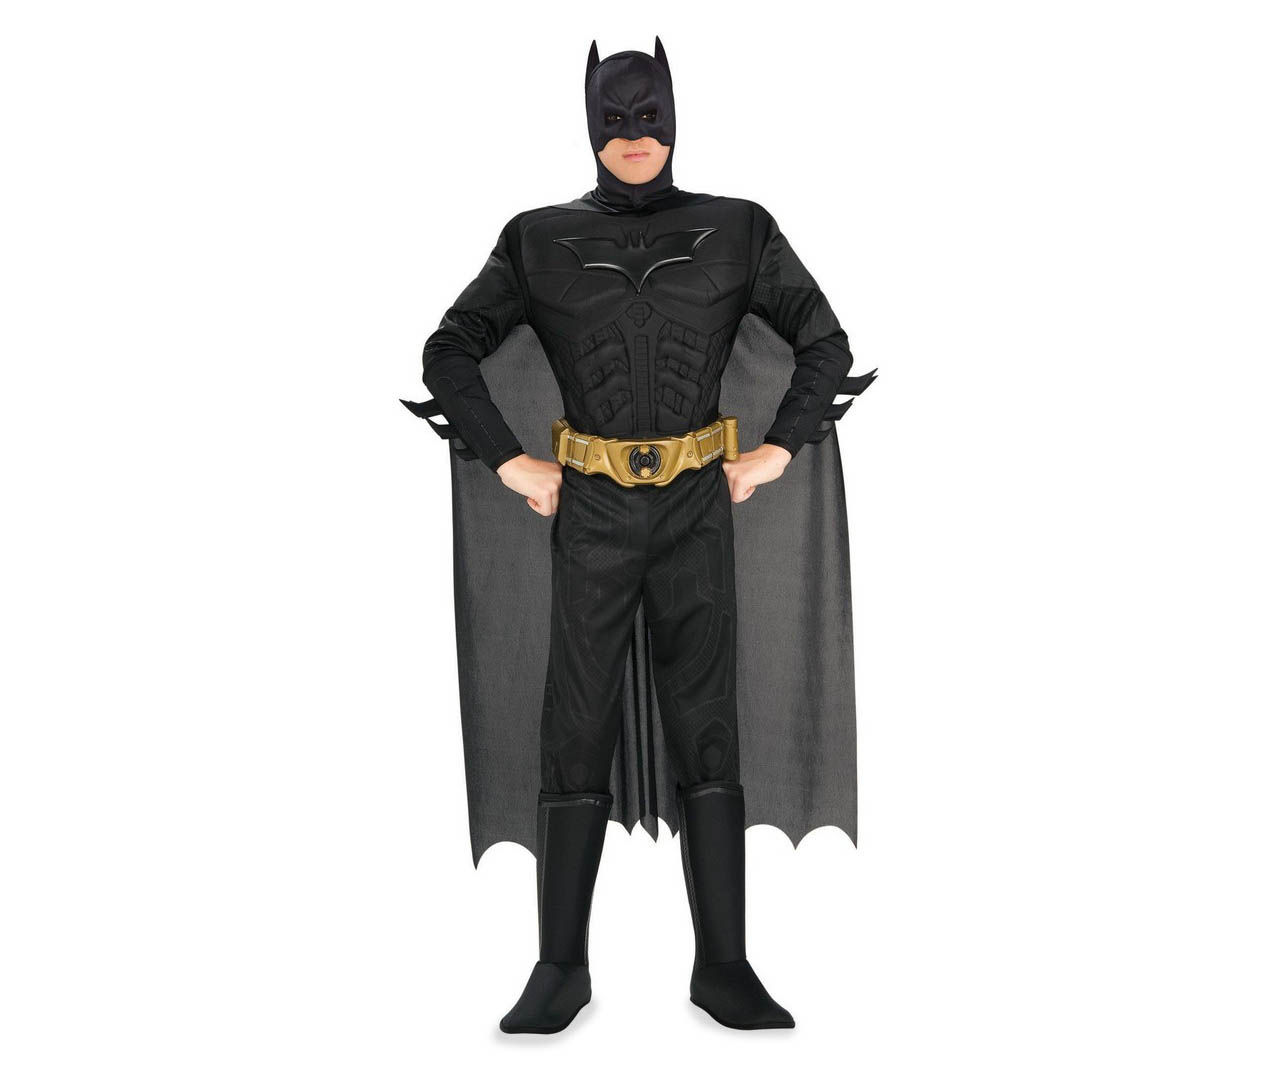 Adult Size X-Large The Dark Knight Batman Deluxe Muscle Chest Costume